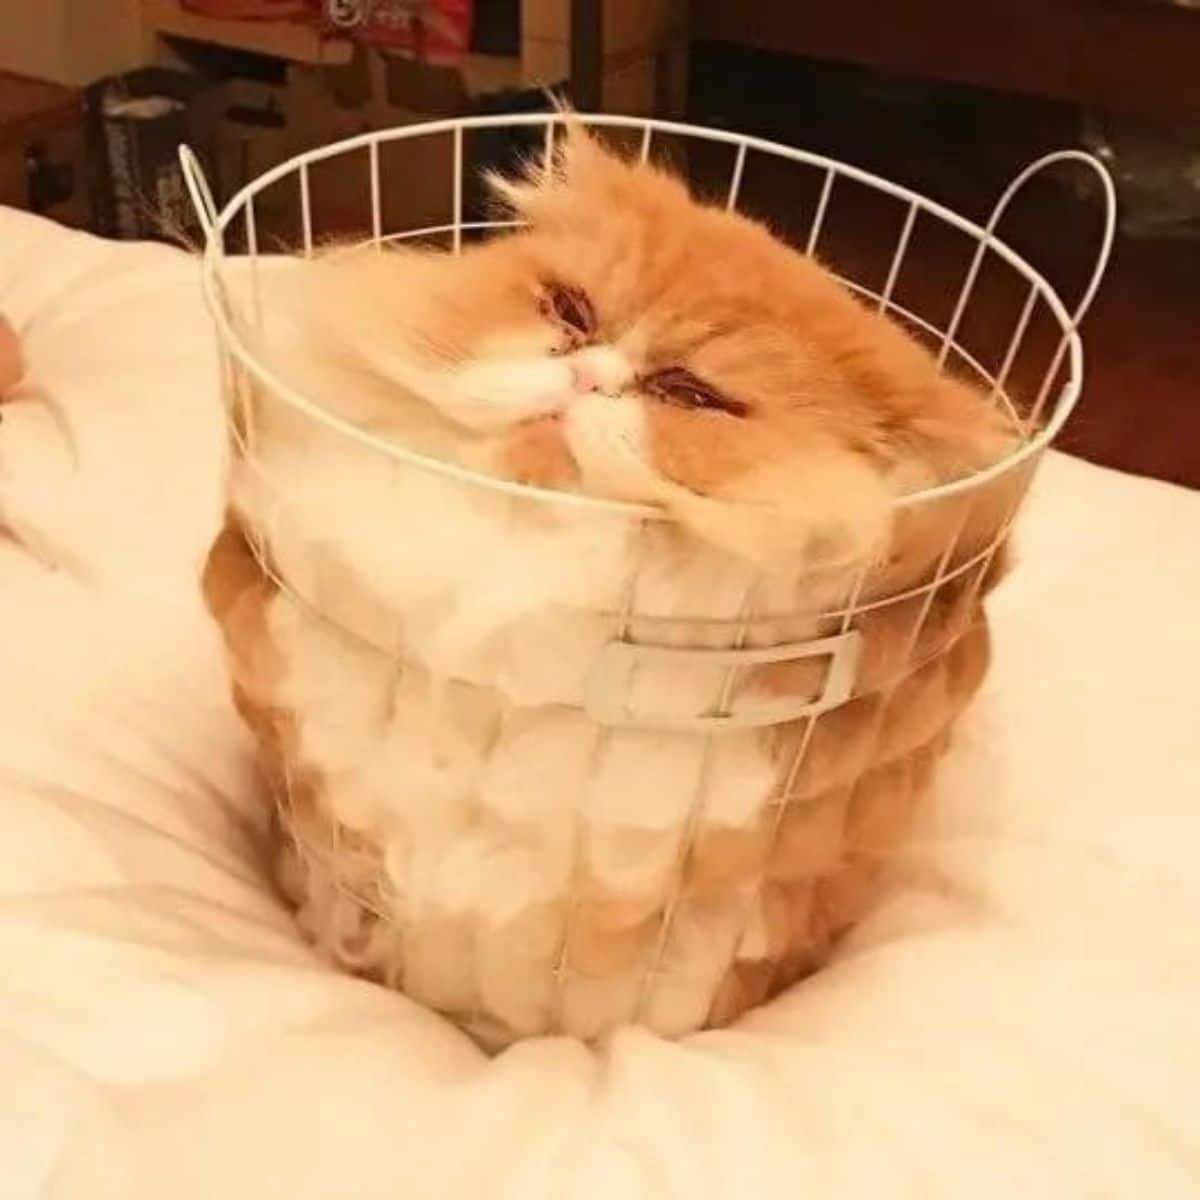 orange and white cat laying inside a white metal bucket with square holes